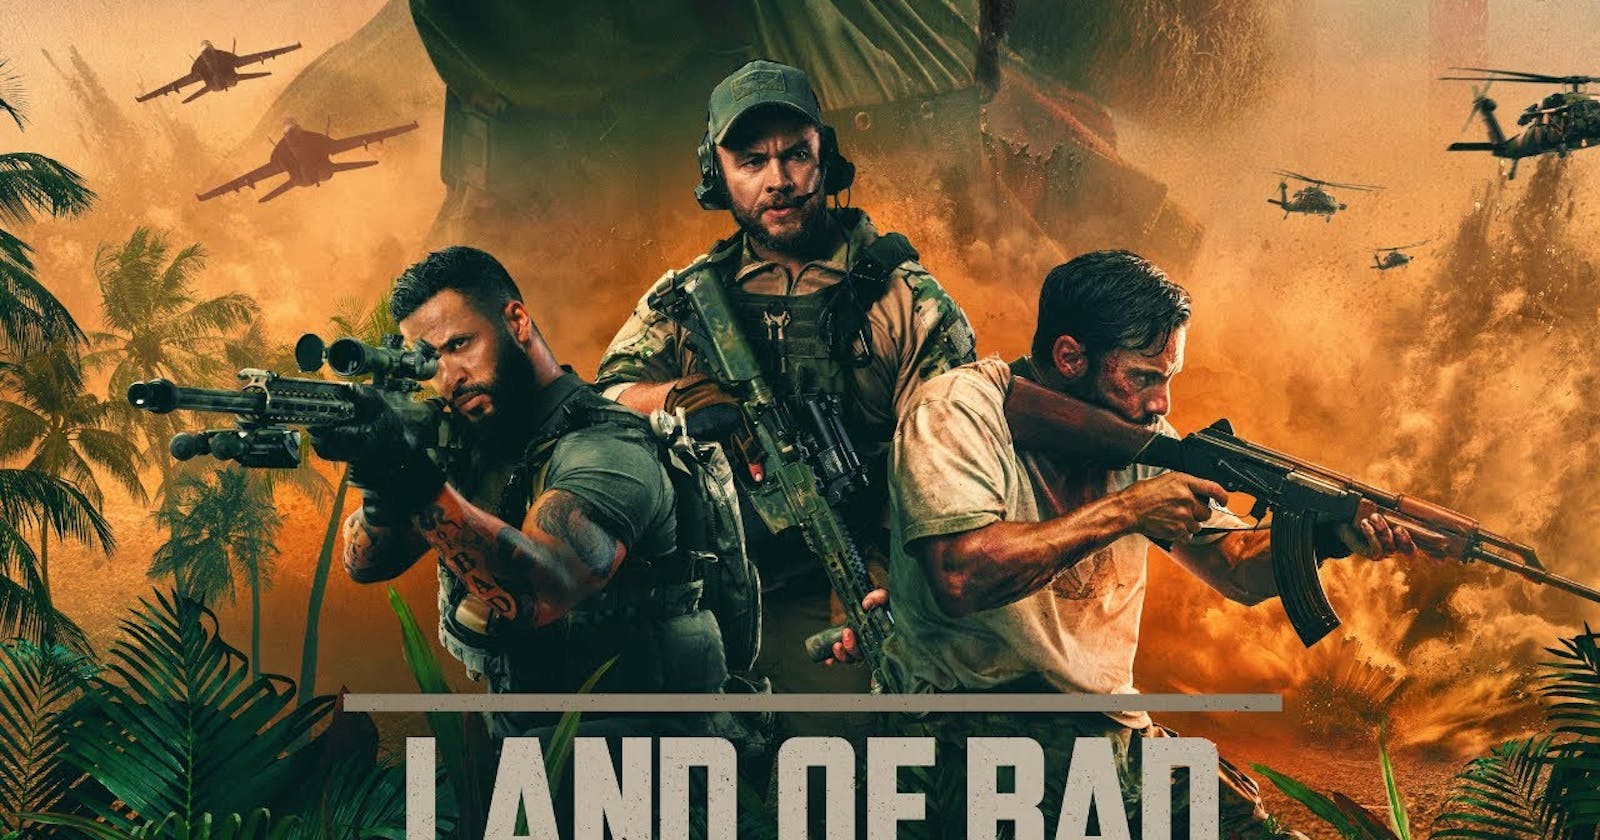 WHEN IS Land of Bad COMING OUT? CAST, ABOUT MOVIE!!